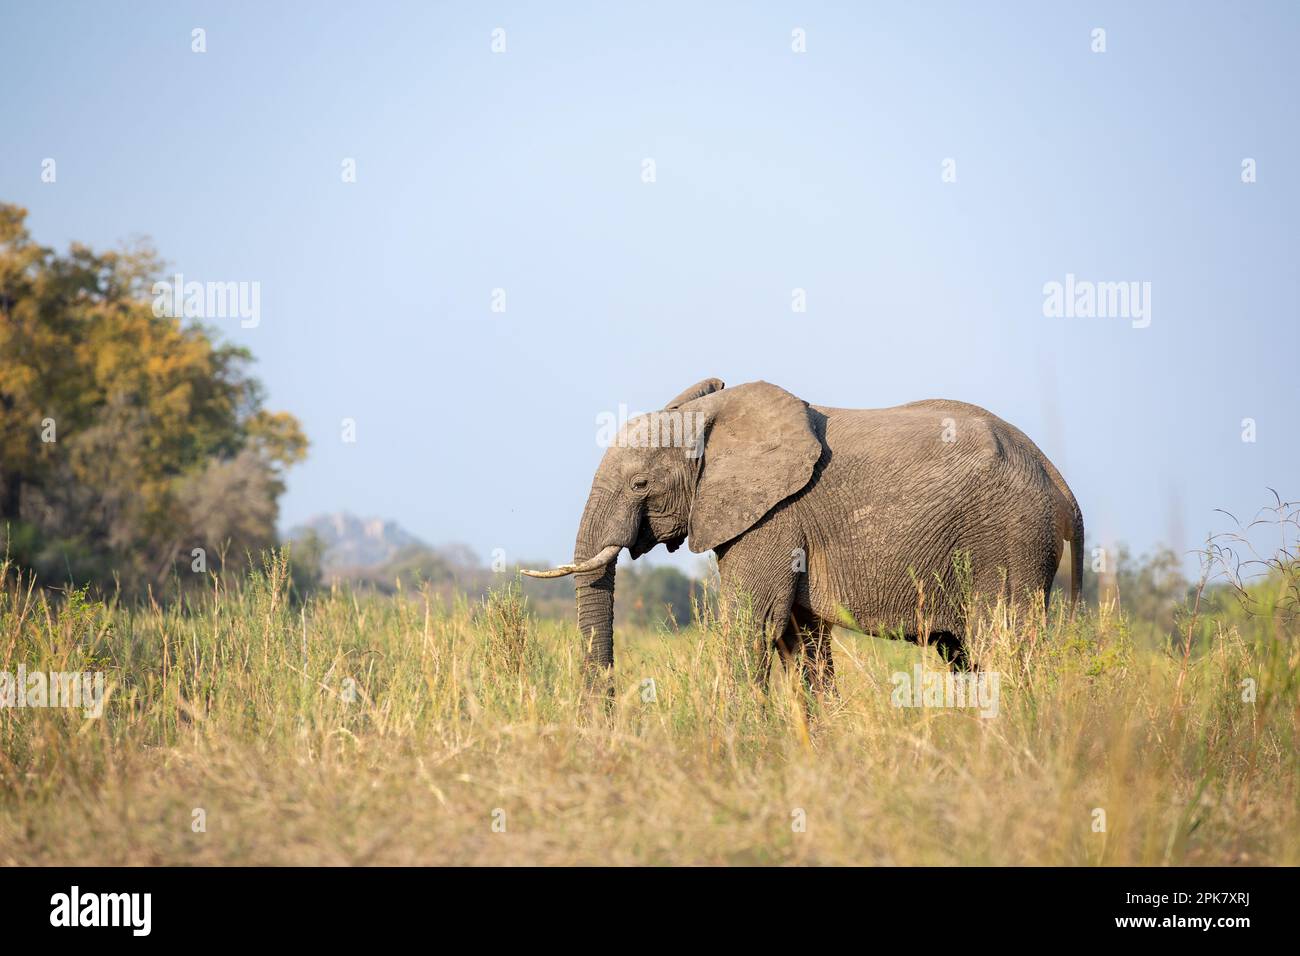 An elephant, Loxodonta africana, walking through long grass, in black and white. Stock Photo